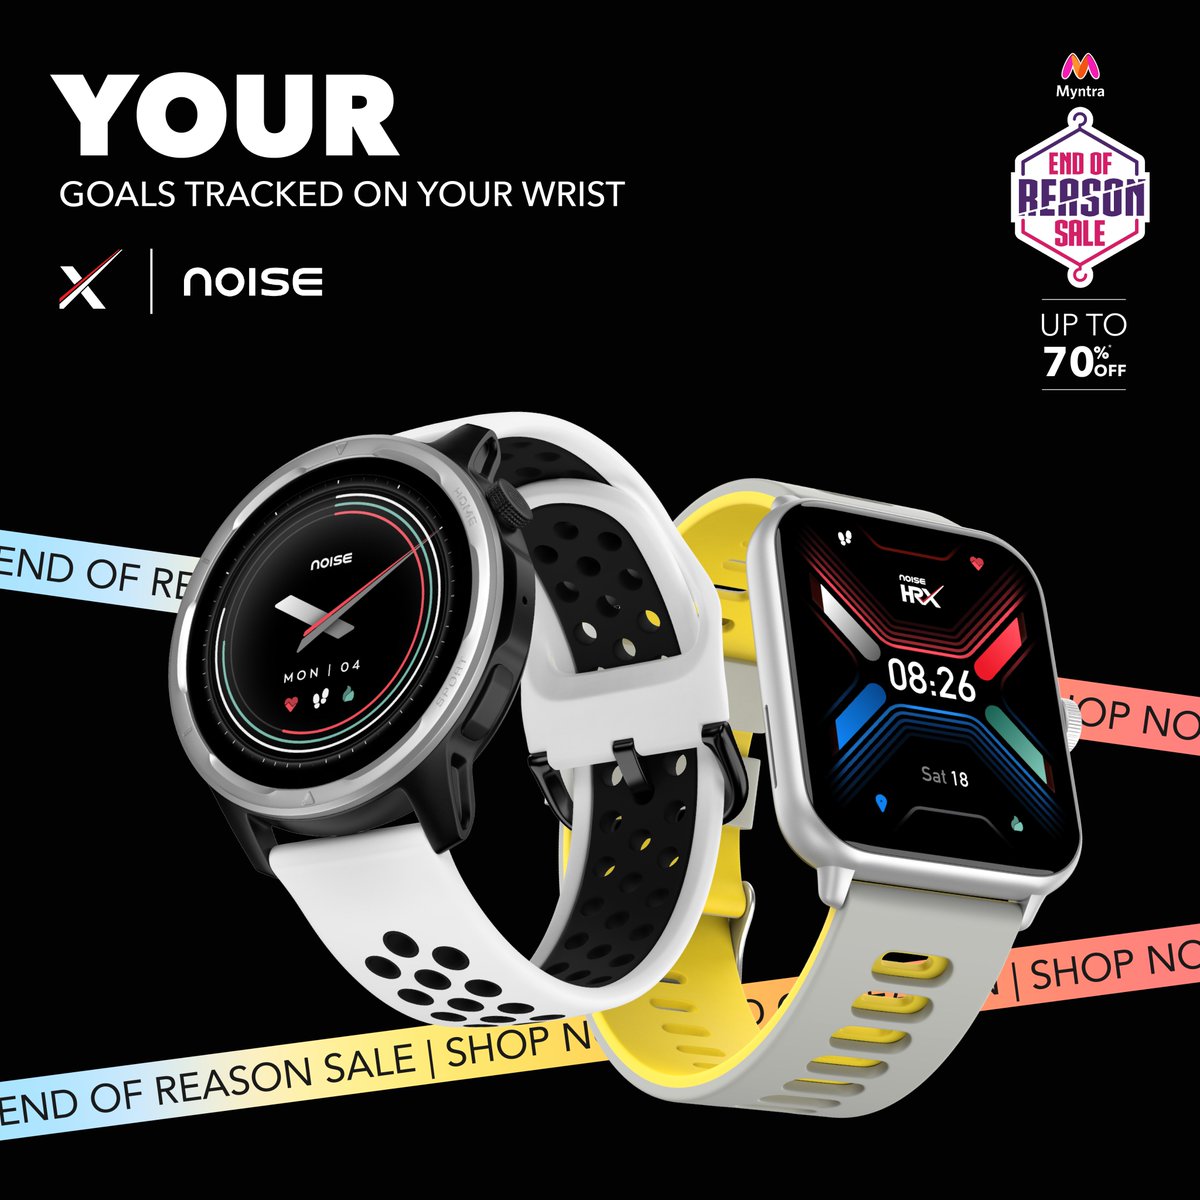 Your search for the ultimate smartwatch ends
here⚡️

Shop our collection on @myntra NOW💯
 
#MyntraEORSisLIVE #HRXSprint #HRXBounce #Noise